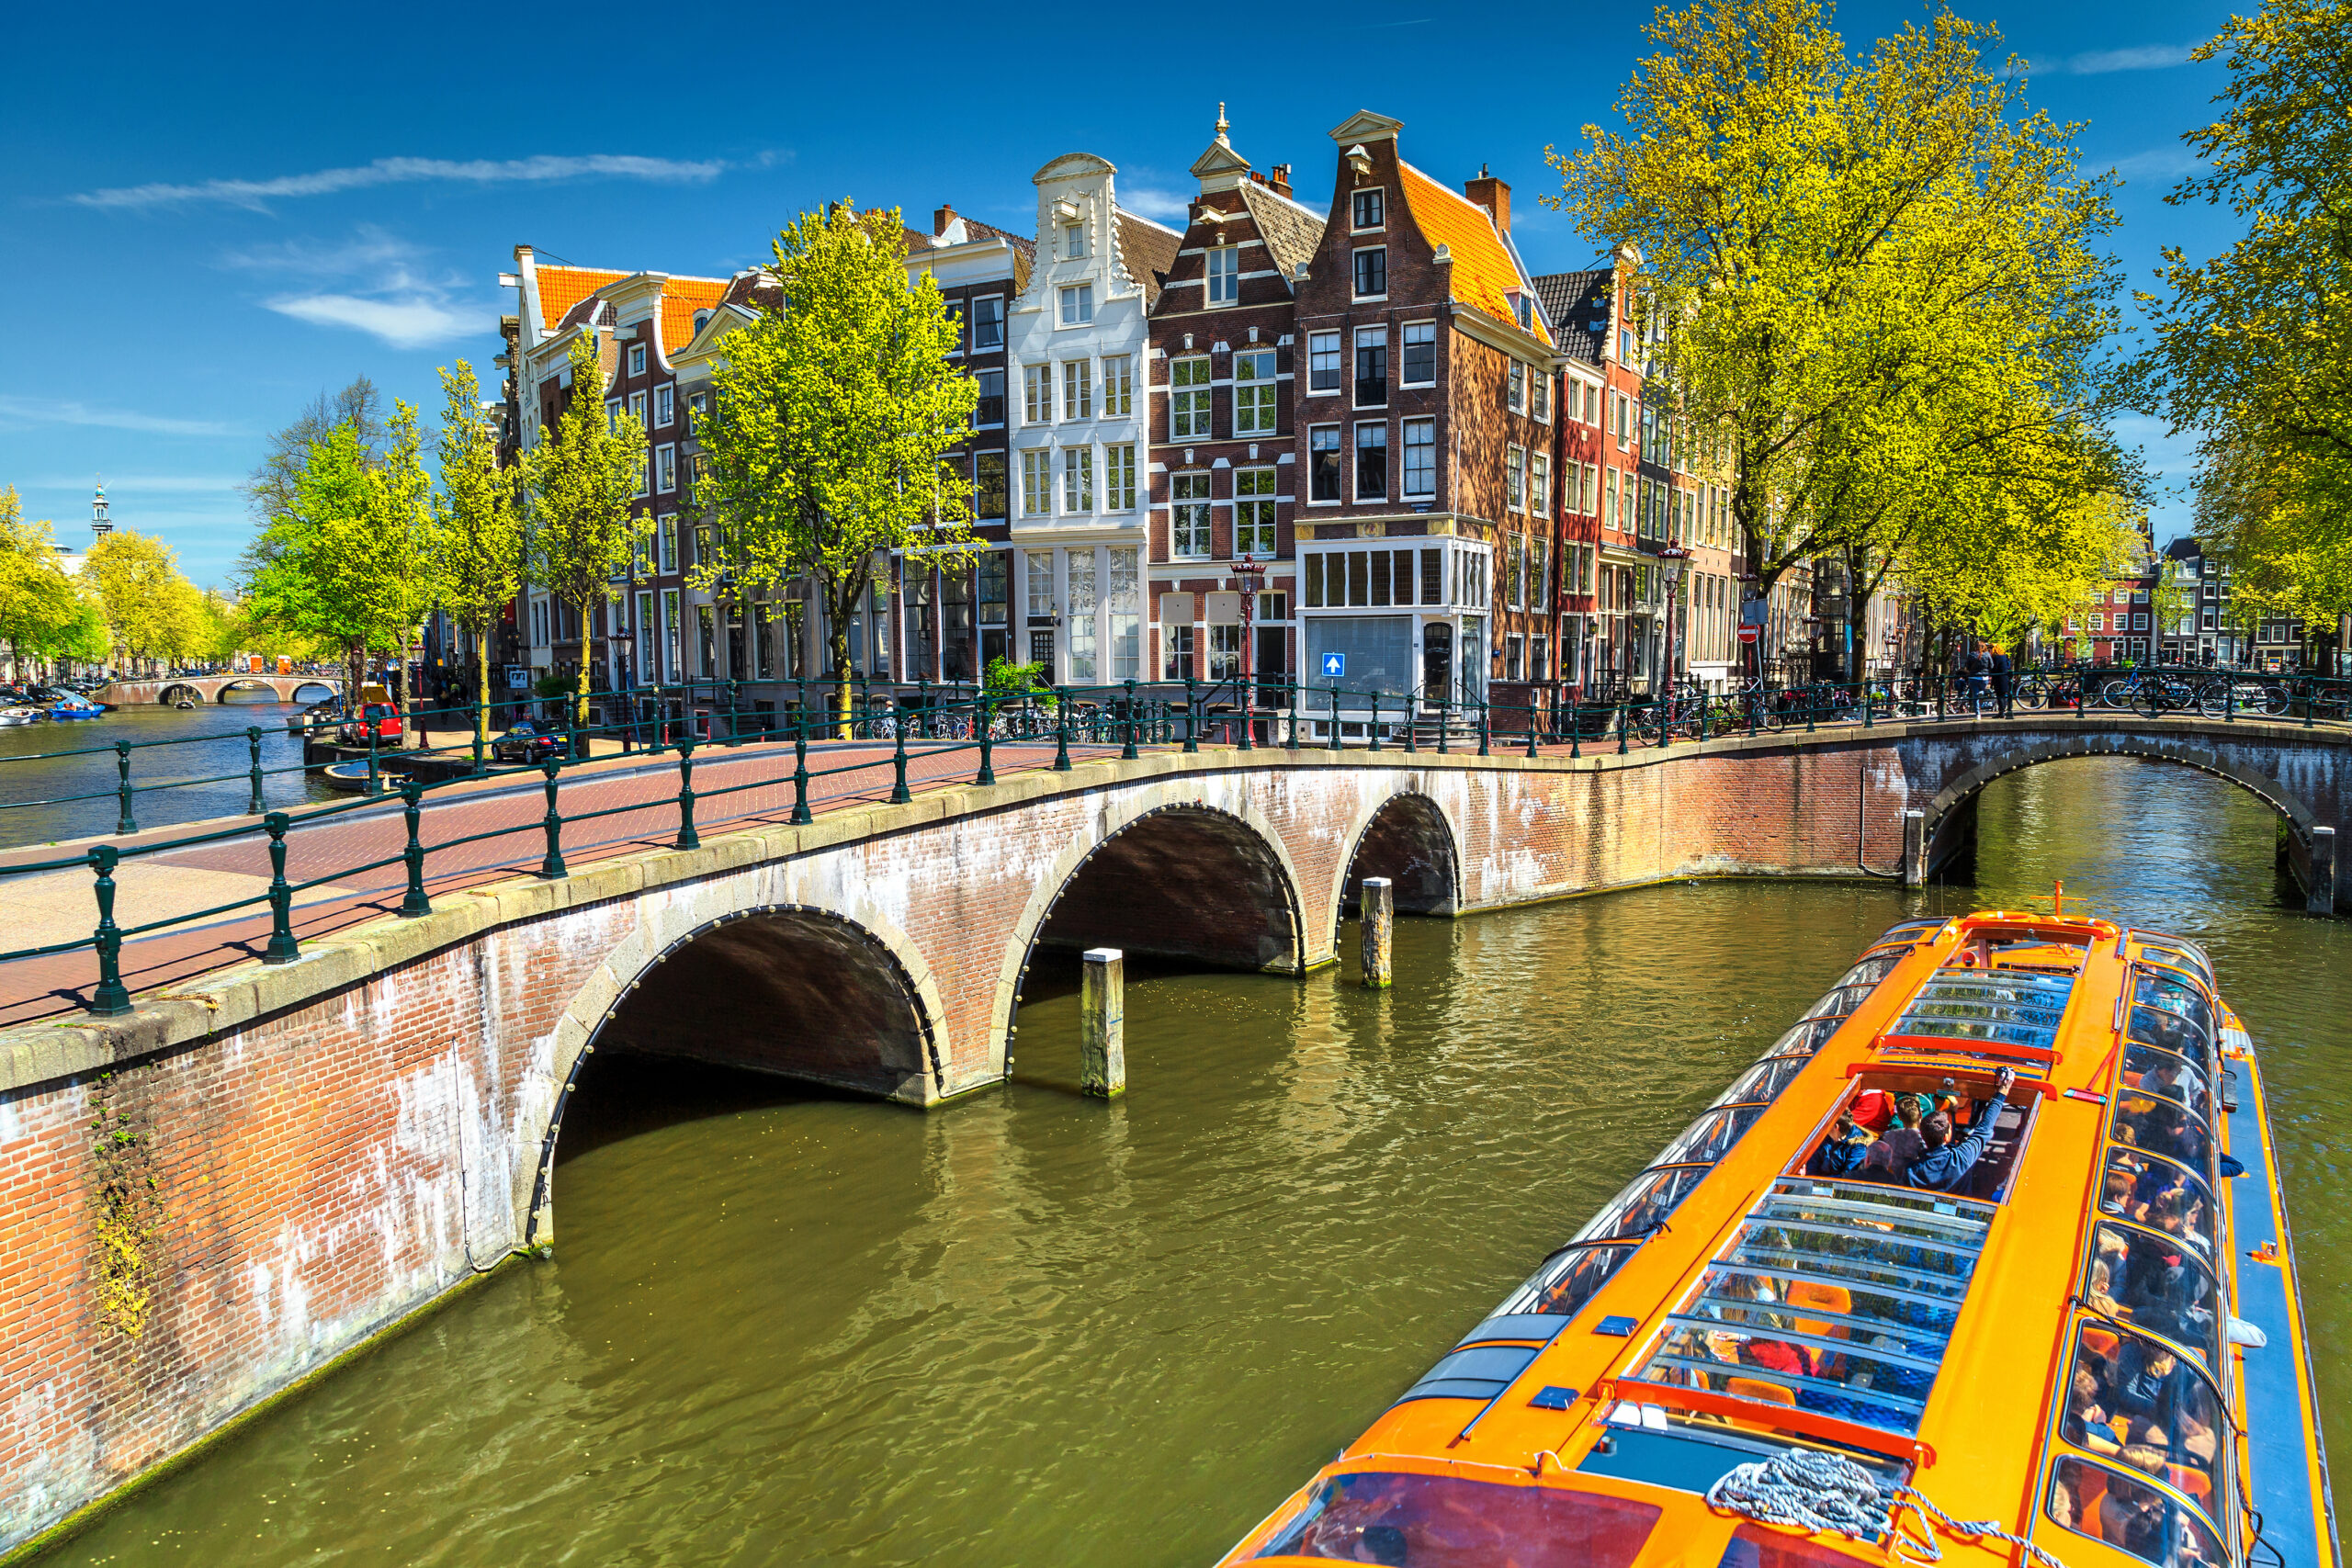 Vestiging Resultaat Chirurgie Amsterdam canal boats go electric ahead of 2025 diesel ban - SAFETY4SEA